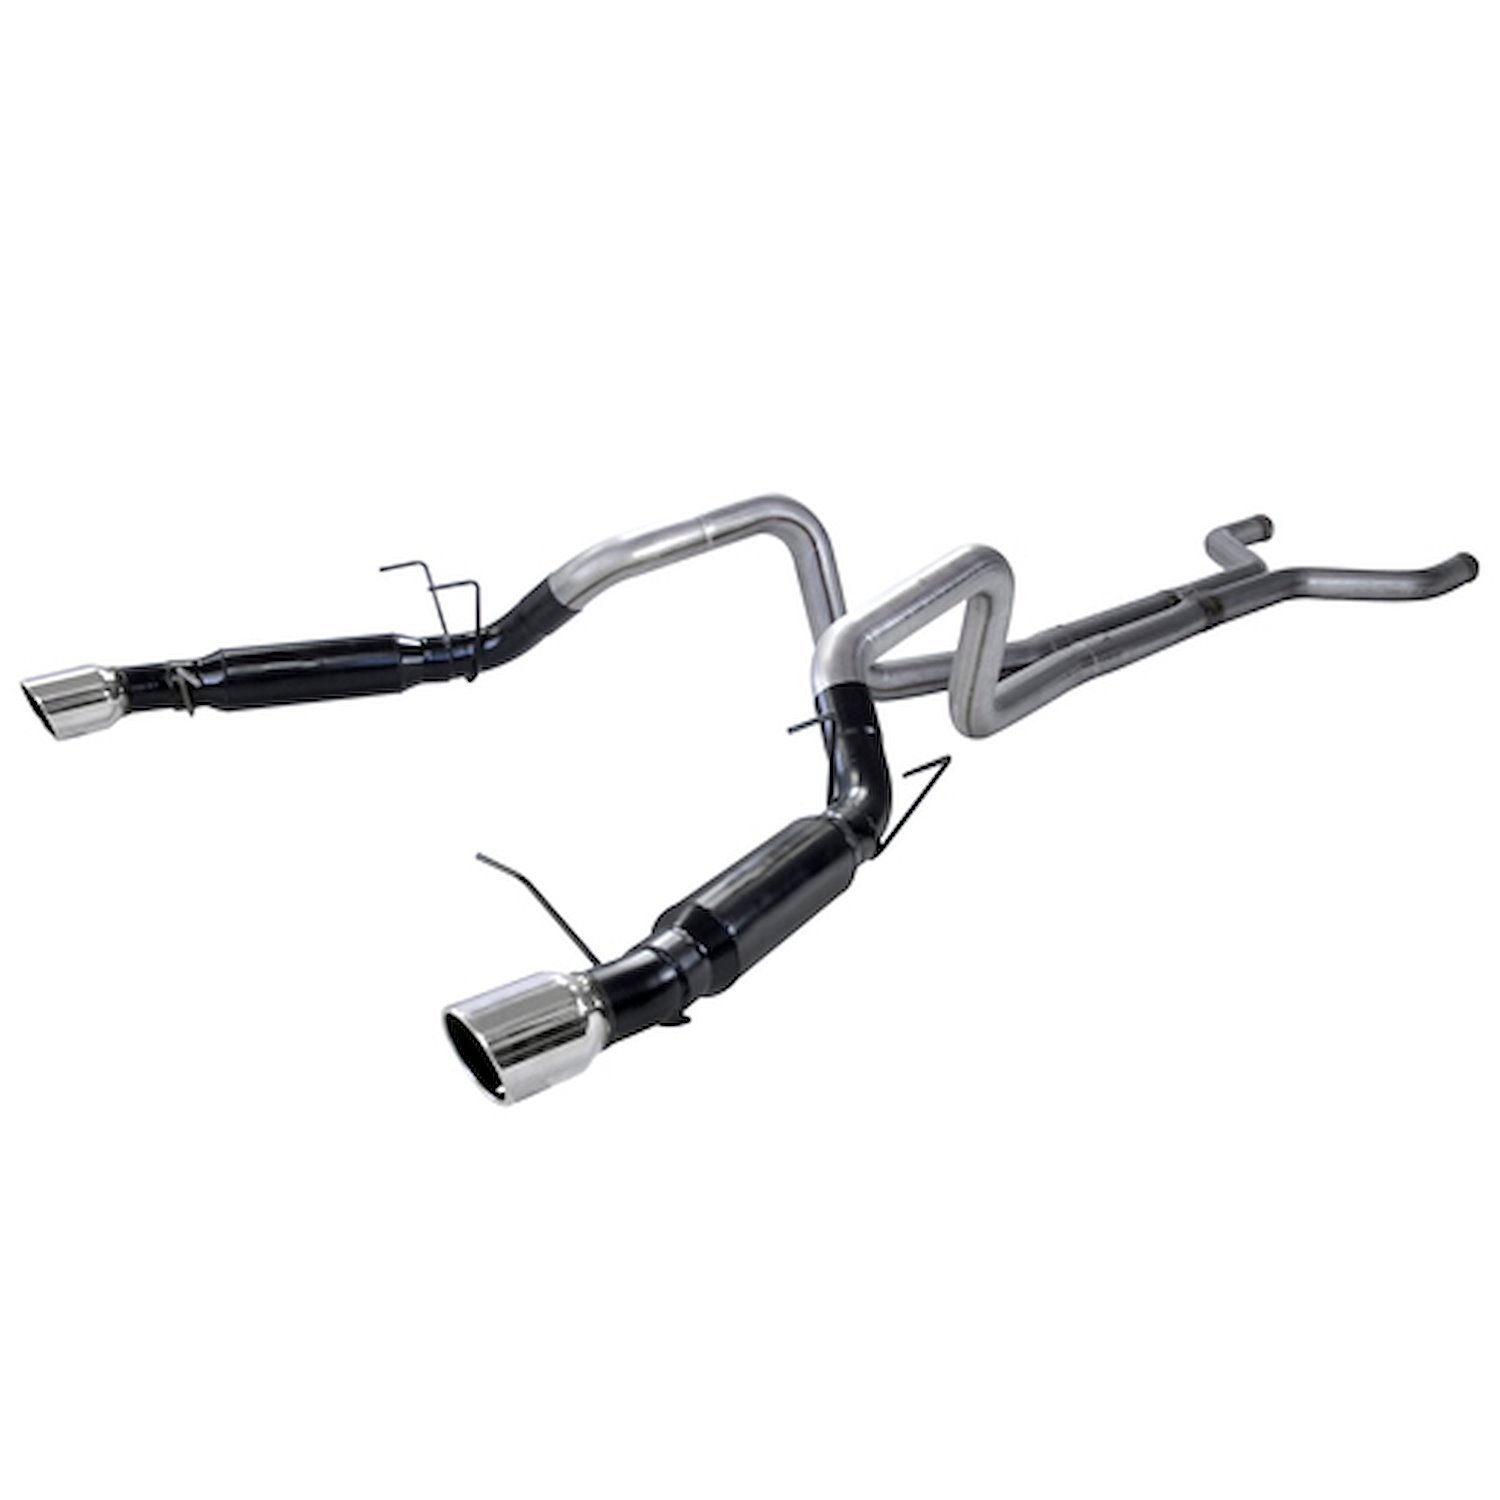 Outlaw Series Cat-Back Exhaust System 2011-2012 Ford Mustang GT/Shelby GT500 5.4L